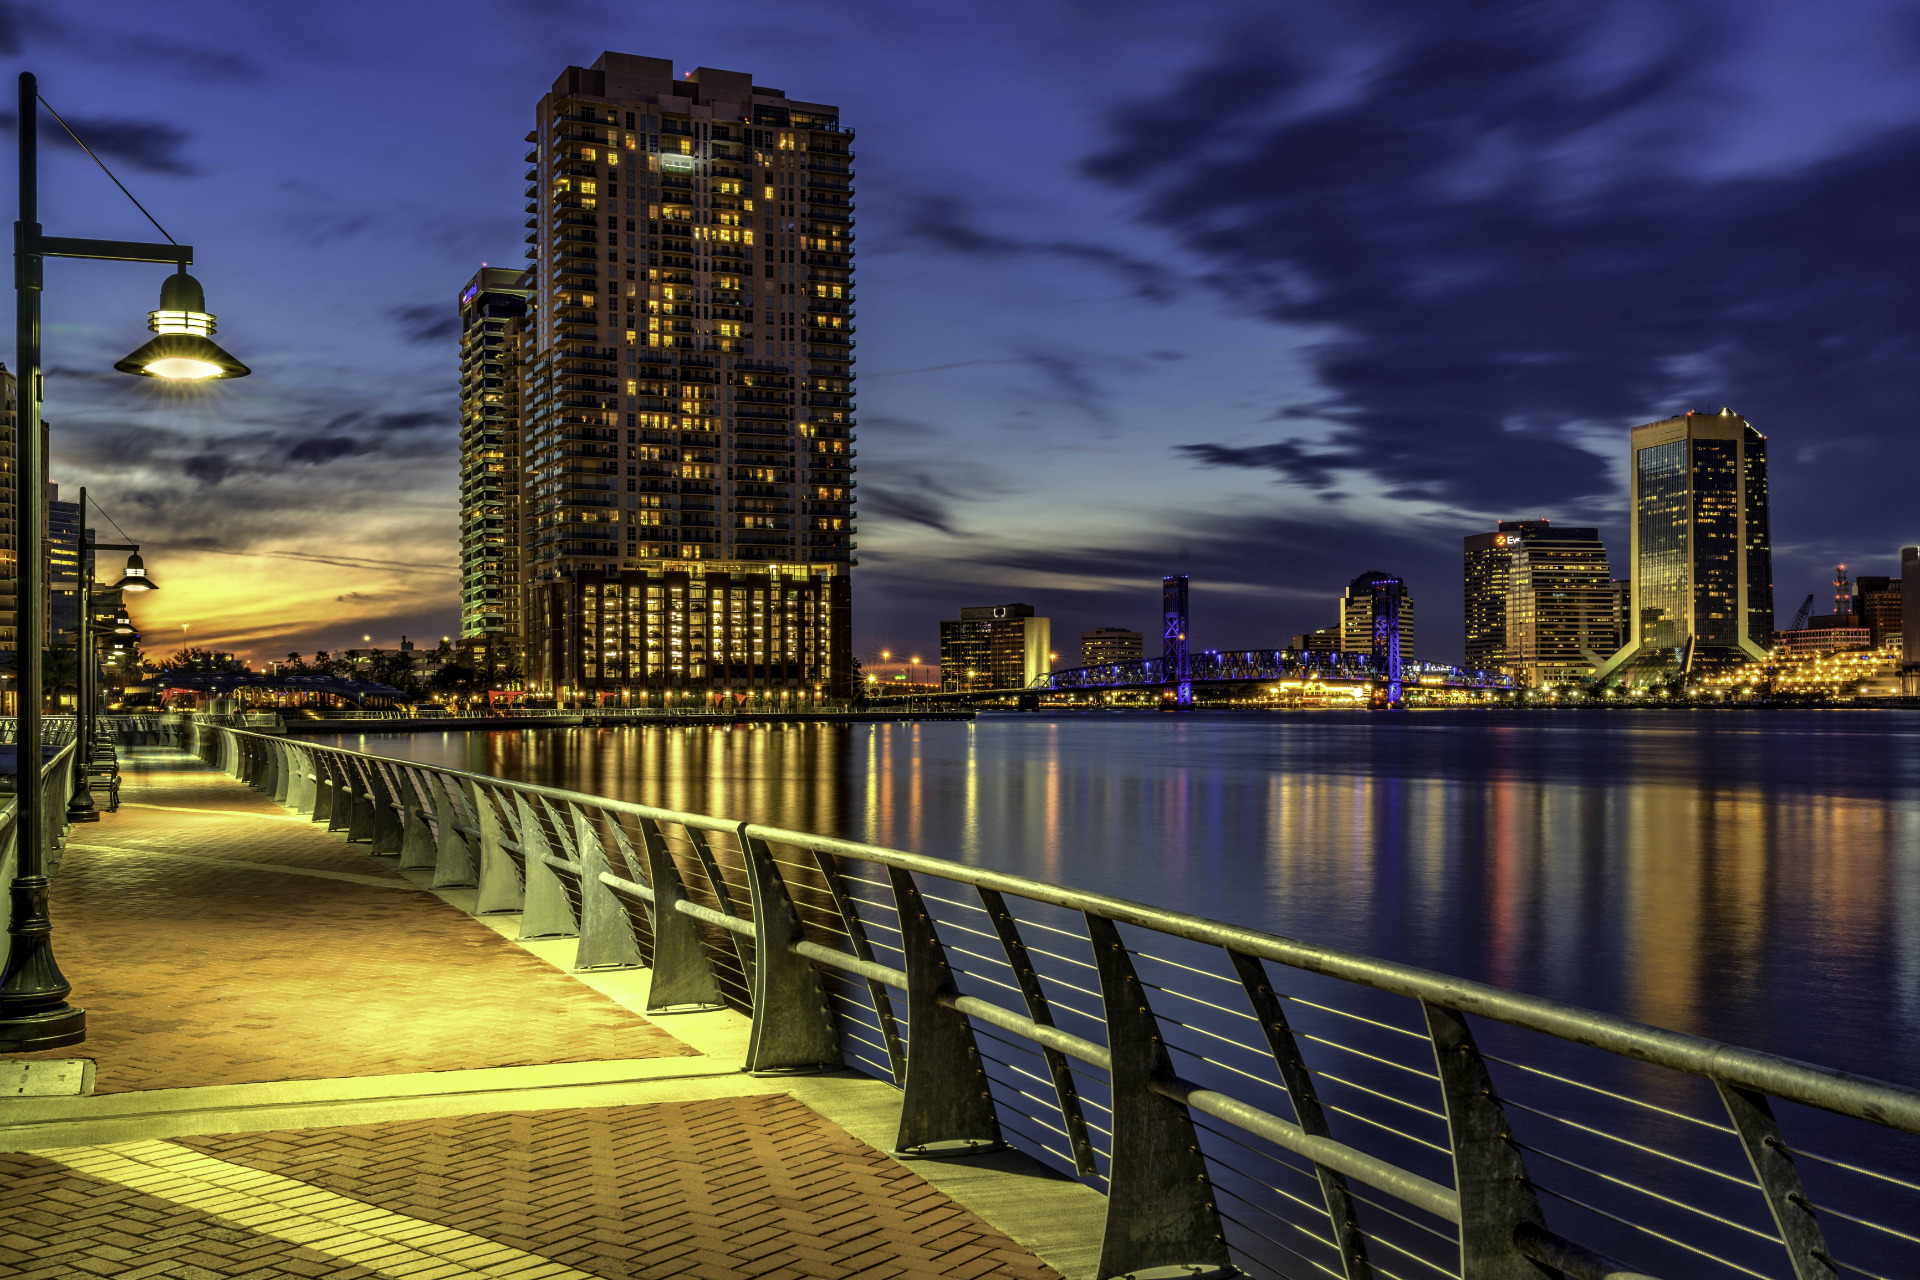 A nighttime look at a walkway in Jacksonville, Fl